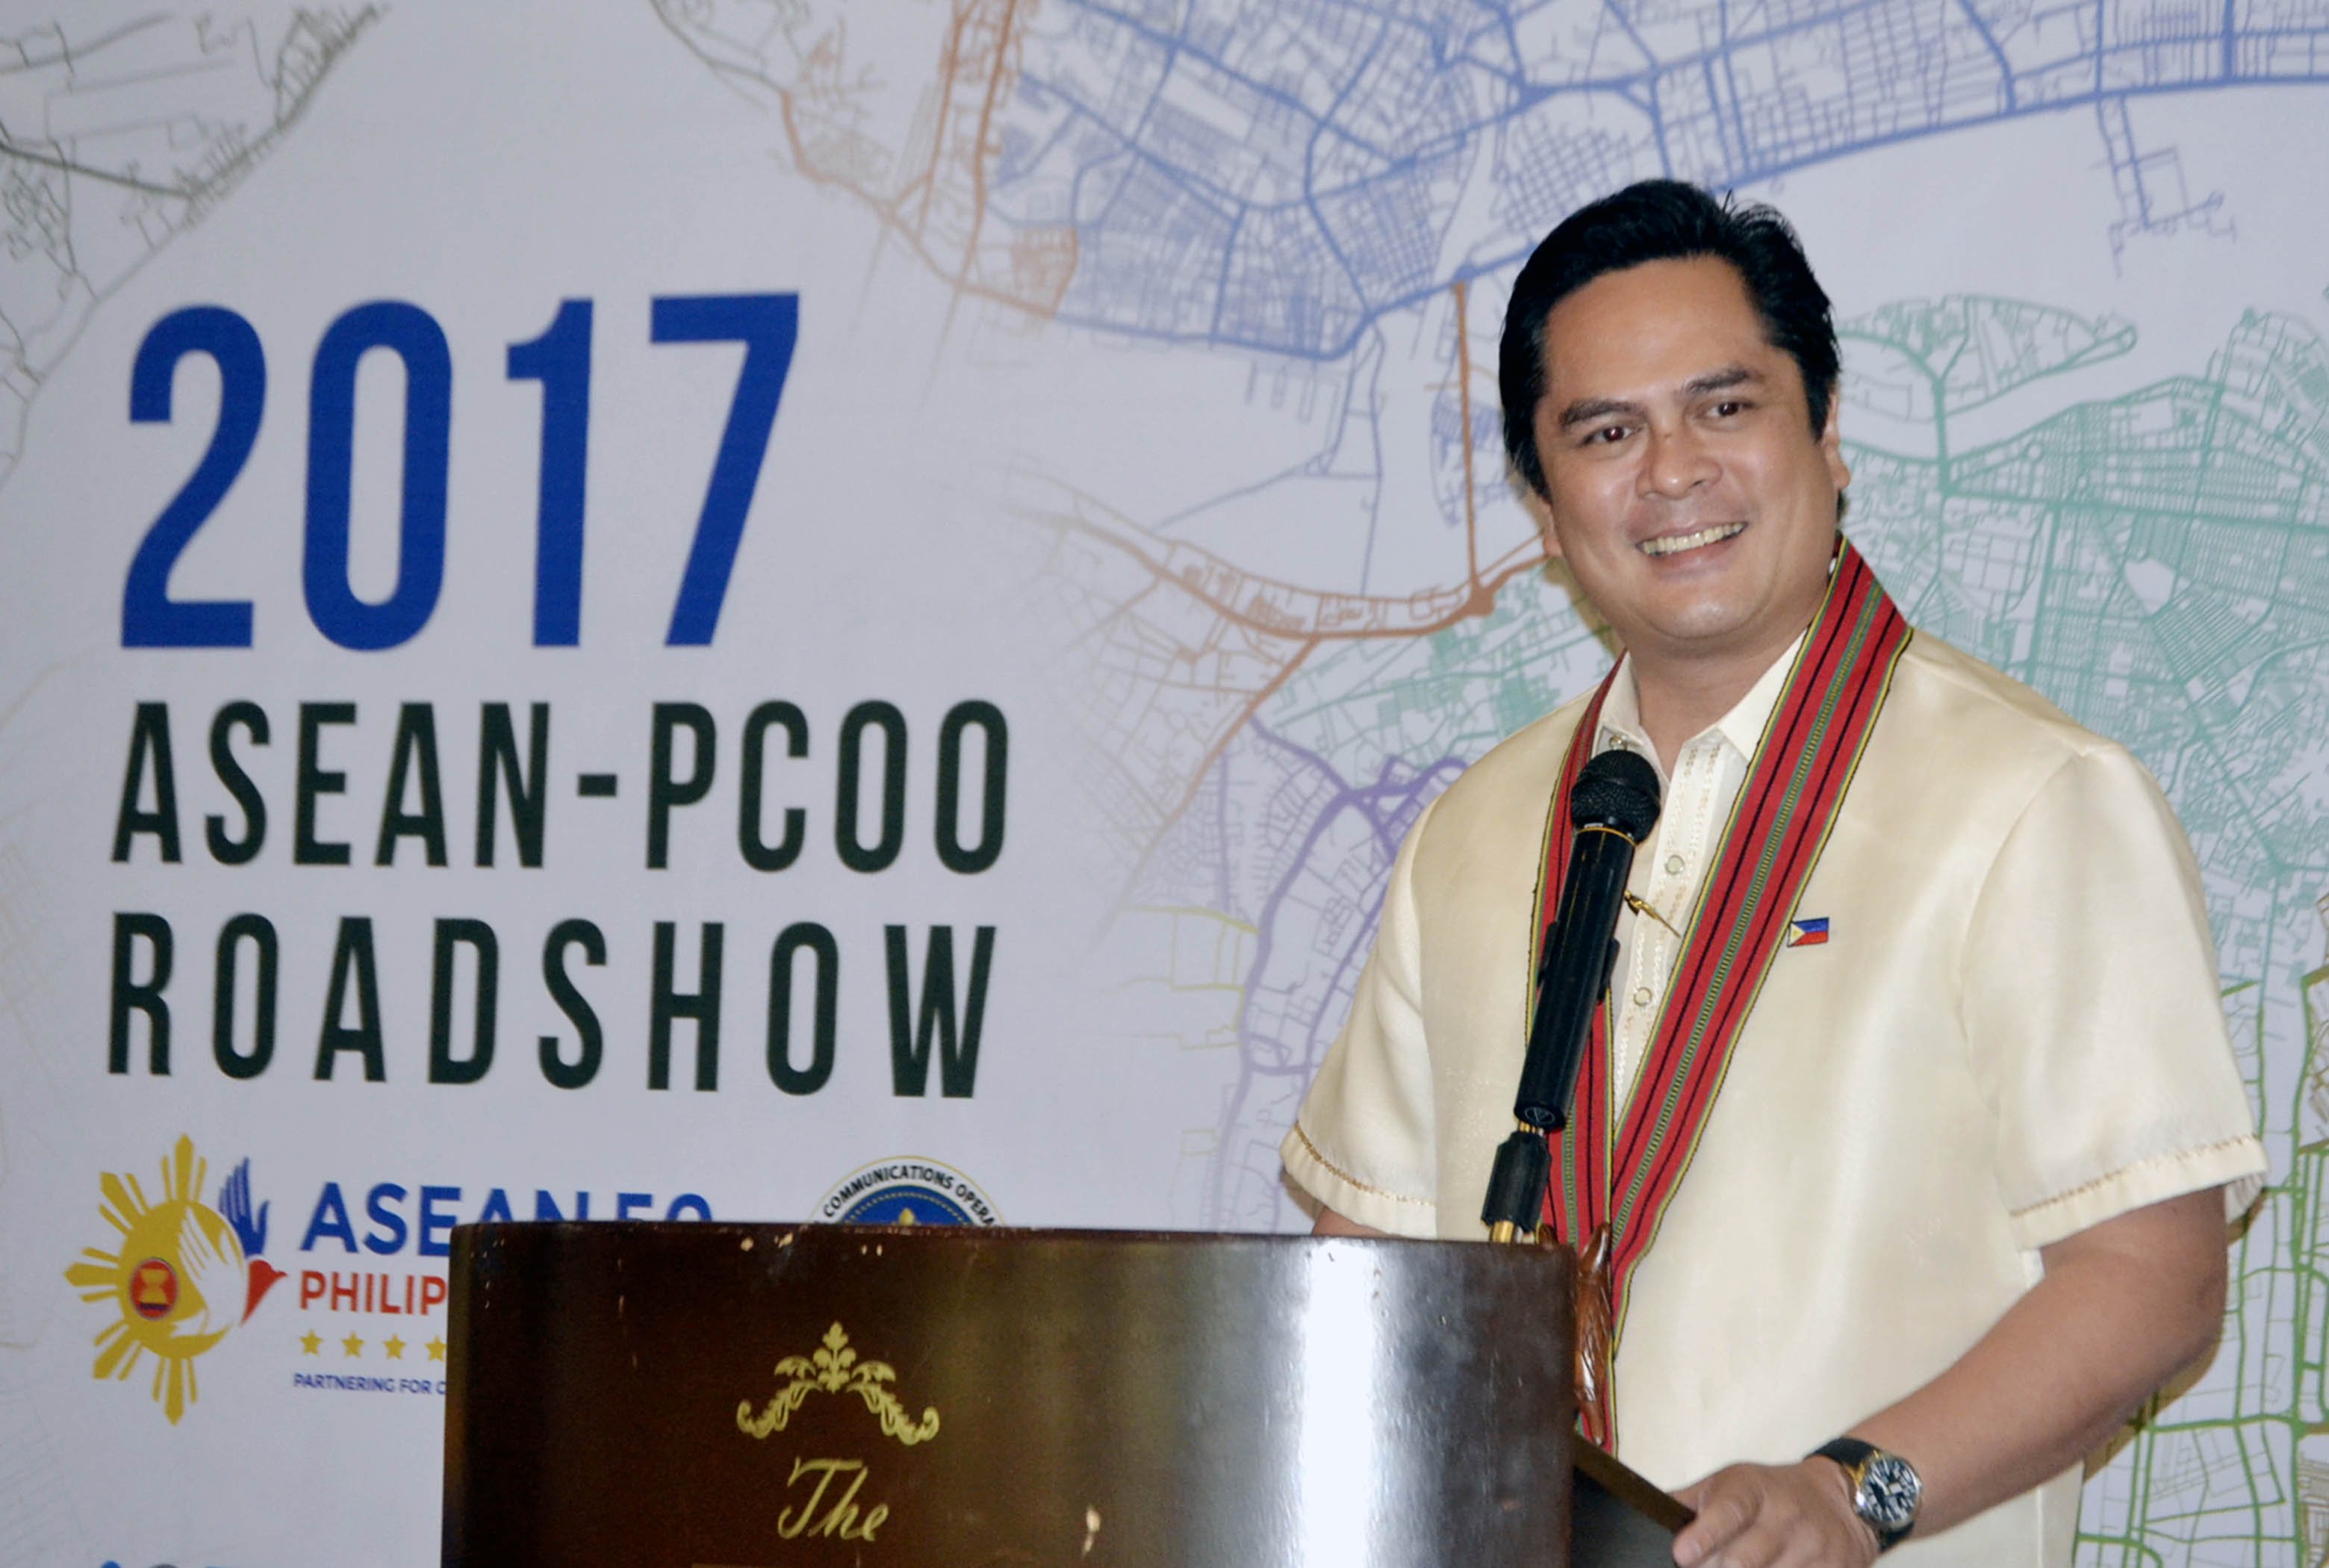 PCOO Secretary Martin Andanar formally opens the 3rd leg of the 2017 ASEAN-PCOO Roadshow in Baguio City